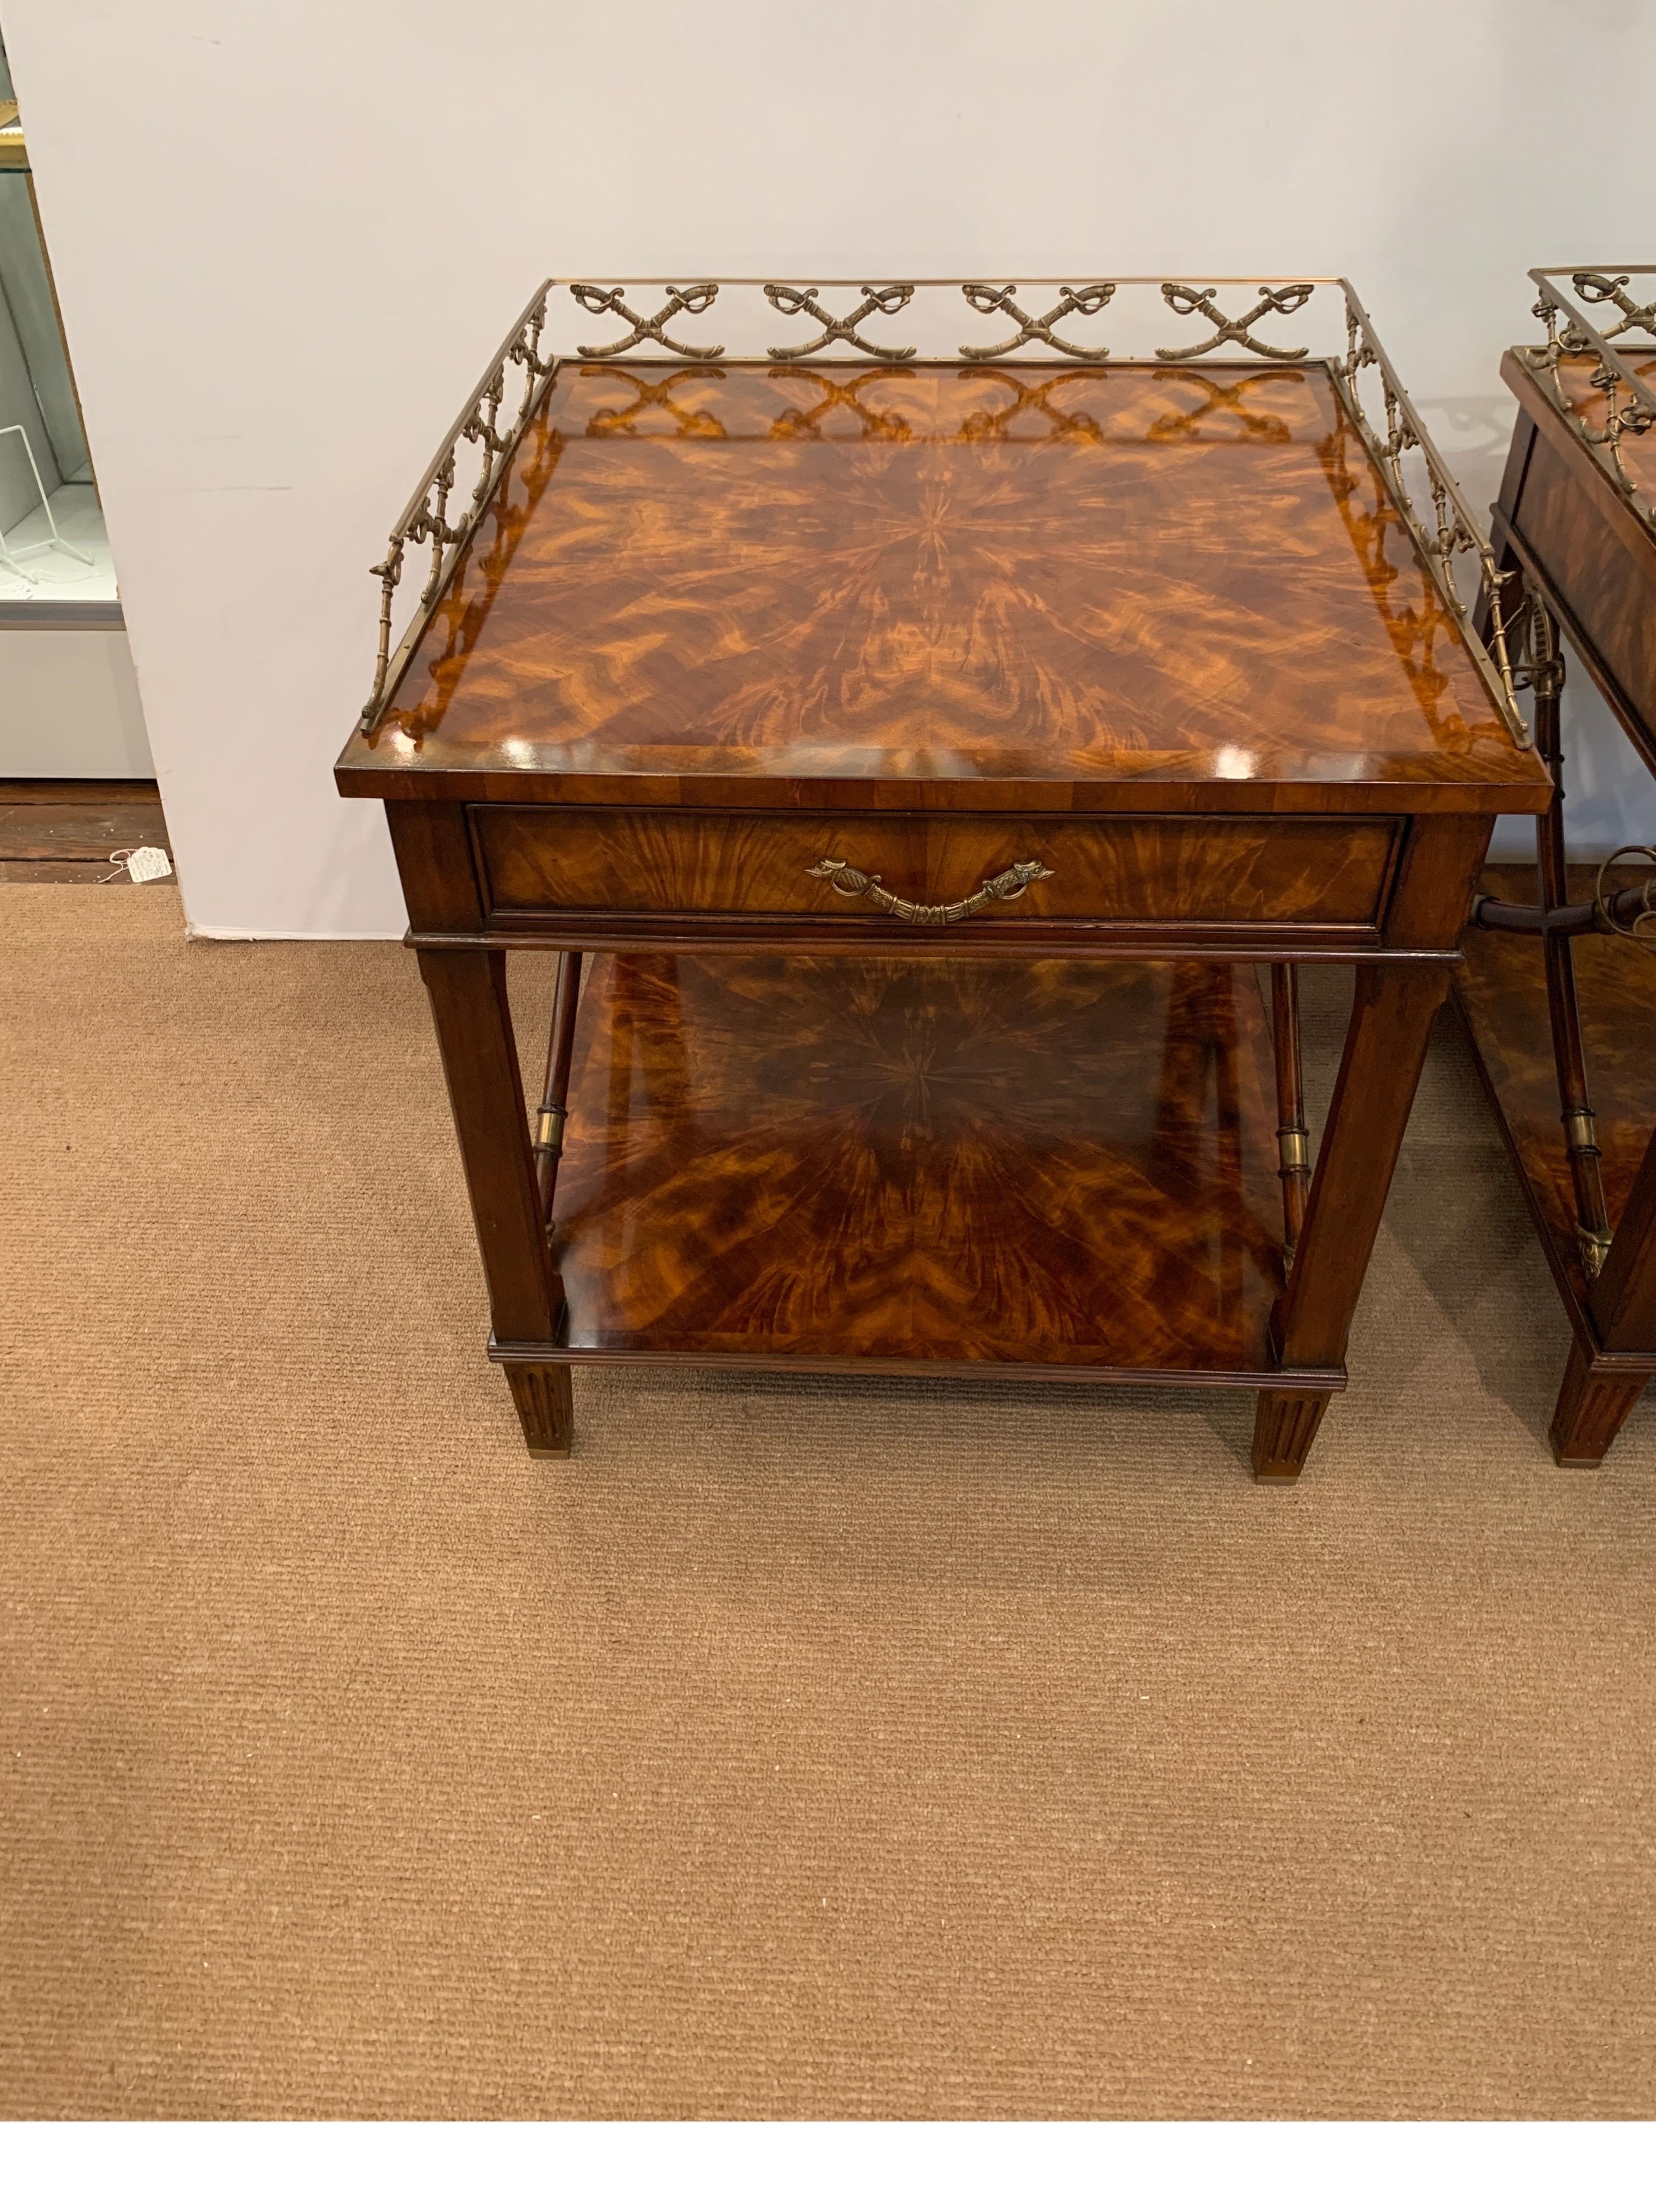 Regency Pair of Bedside or Lamp Tables in Flame Mahogany